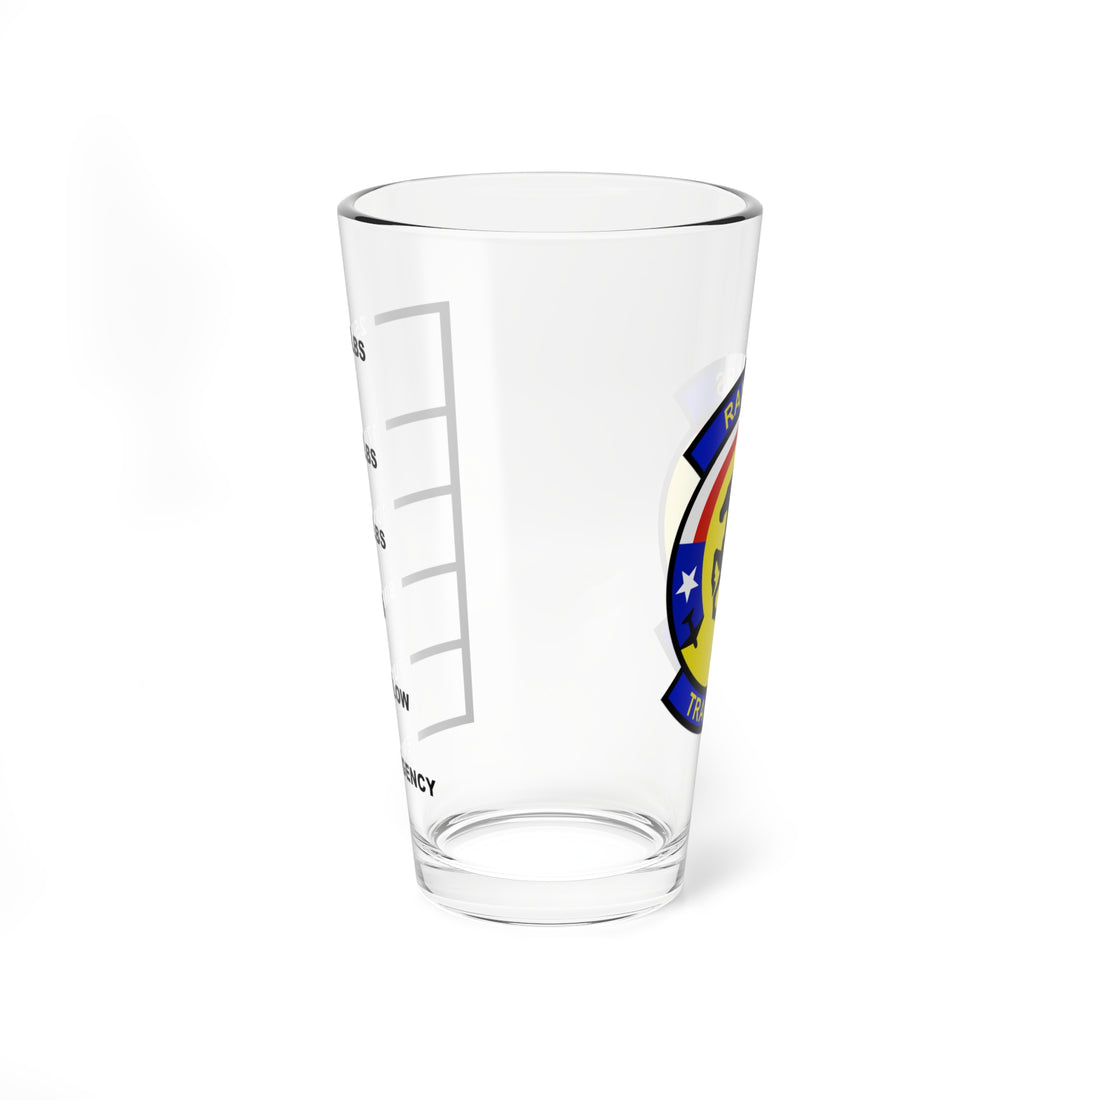 VT-28 "Rangers" Fuel Low Pint Glass Mixing Glass, 16oz, Navy, Marine, Aviator, Aviation, Wings, Veteran, Helicopter, Training